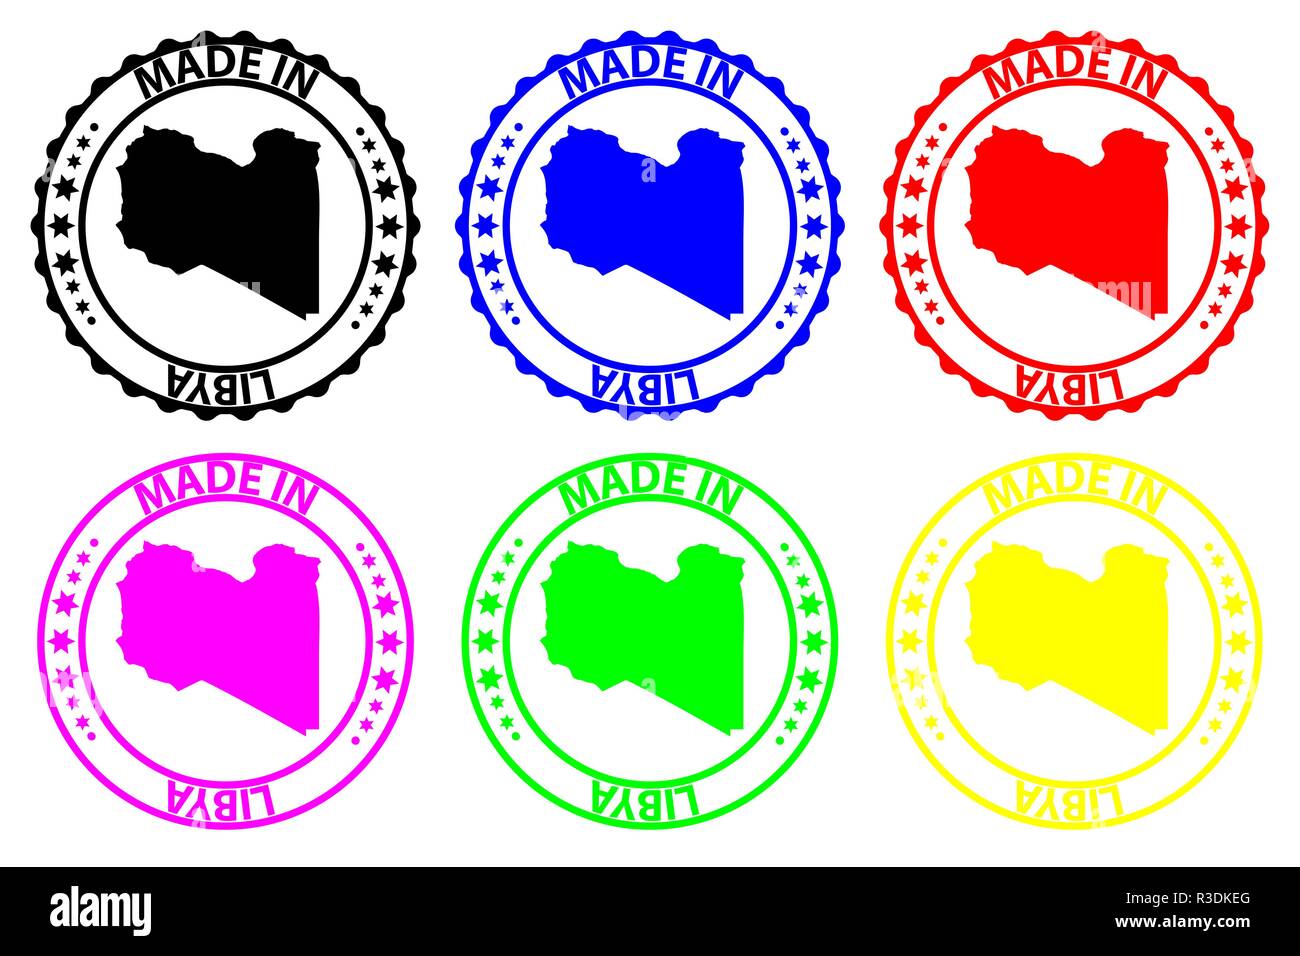 Made in Libya - rubber stamp - vector, Libya map pattern - black, blue, green, yellow, purple and red Stock Vector